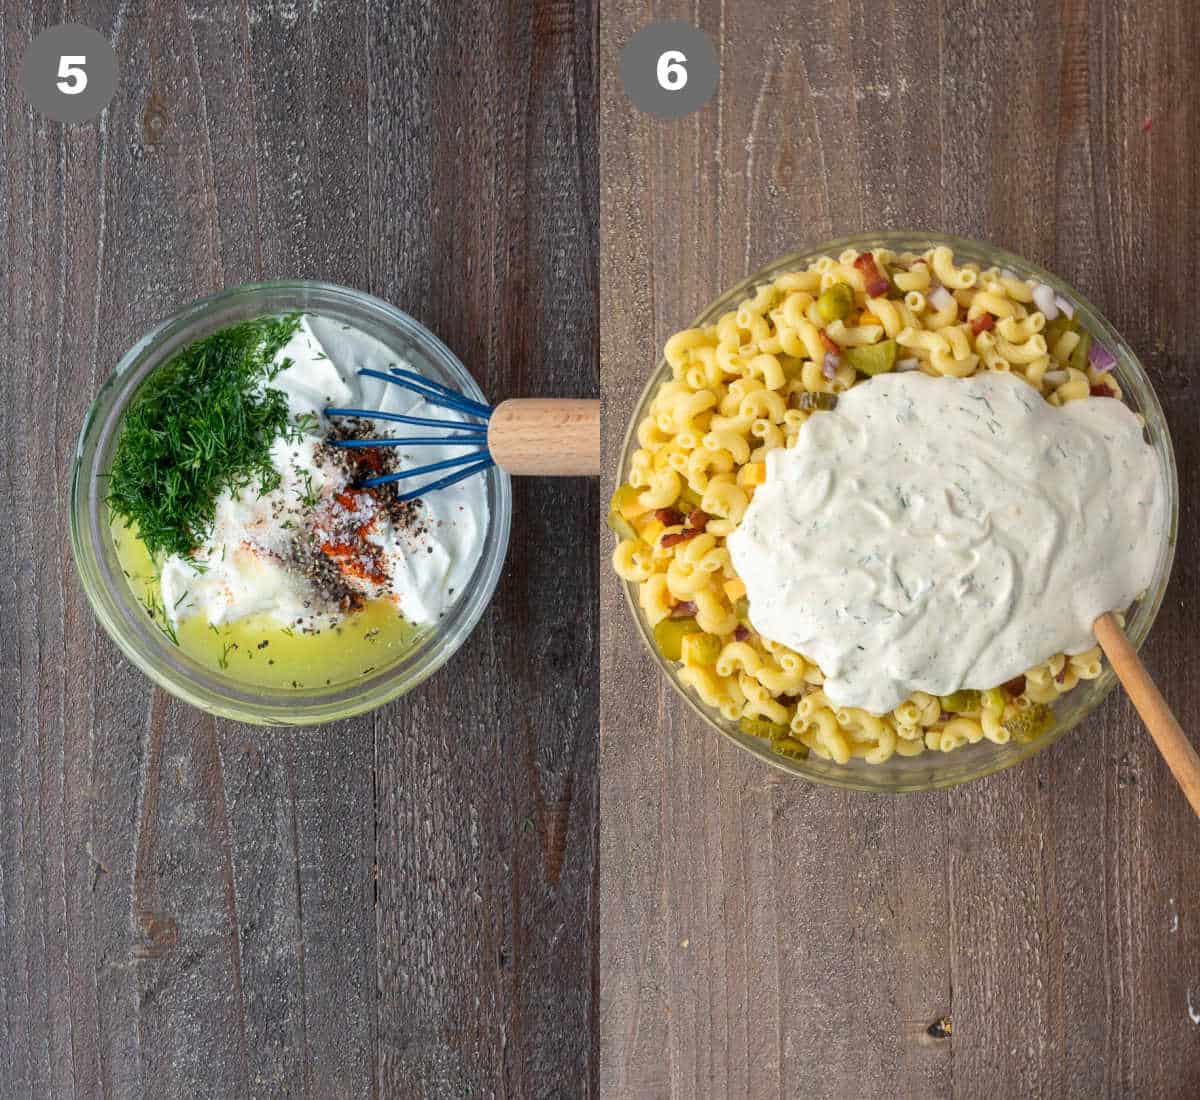 Dressing mixed in a bowl then added to the pasta.